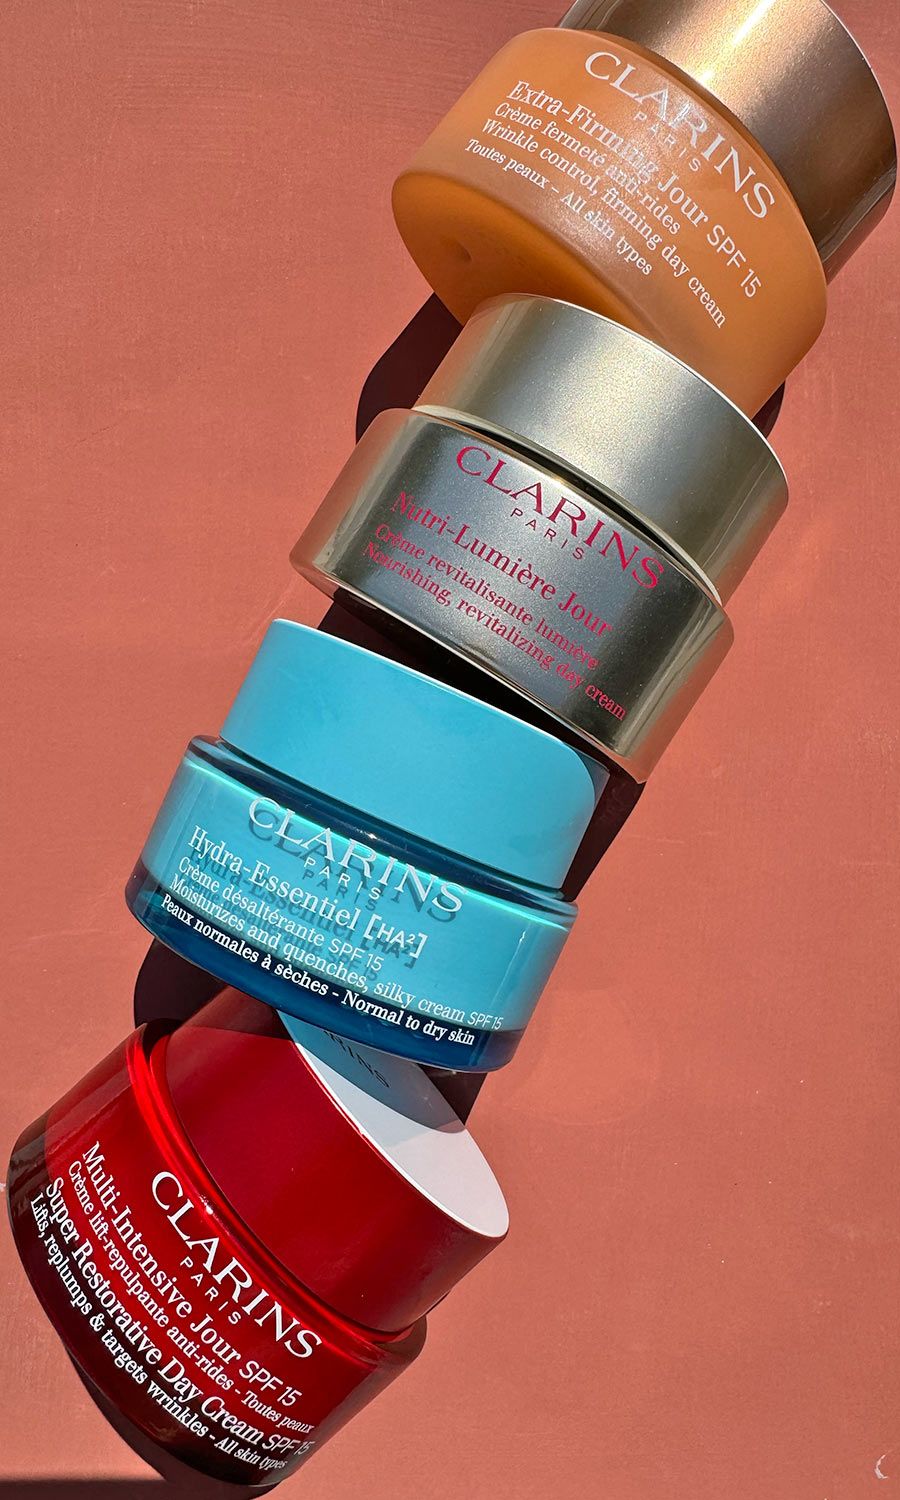 On trial: Clarins most hotly anticipated moisturiser sets